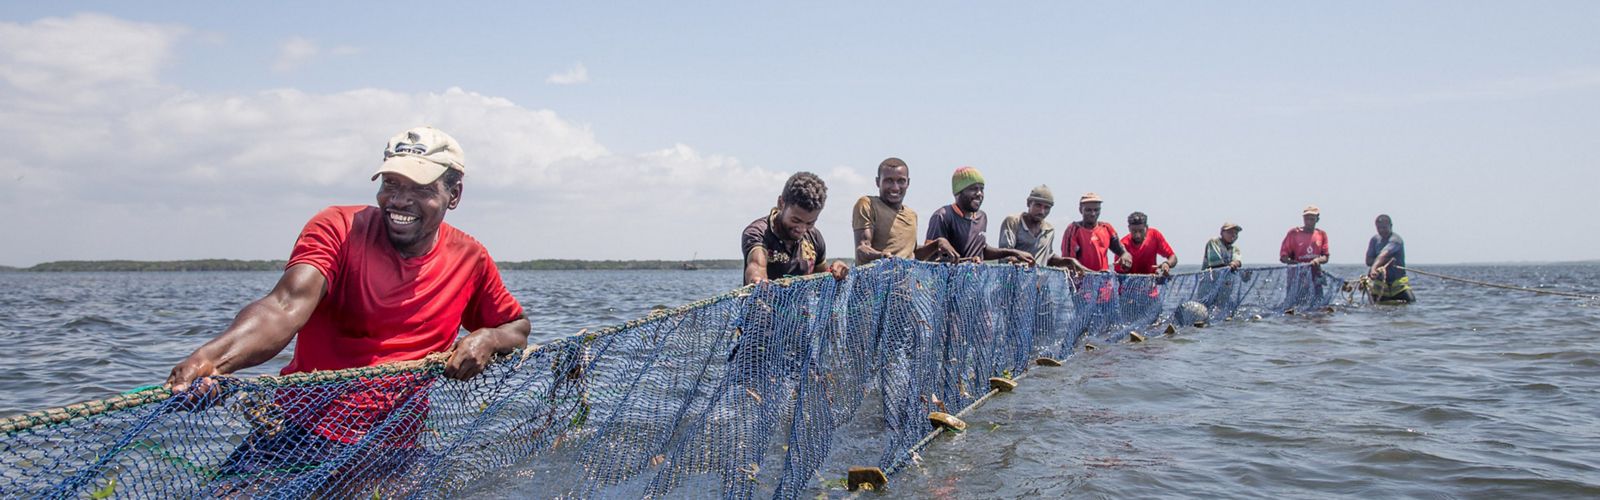 A line of men stand waist-deep in water and pull on a large fishing net.